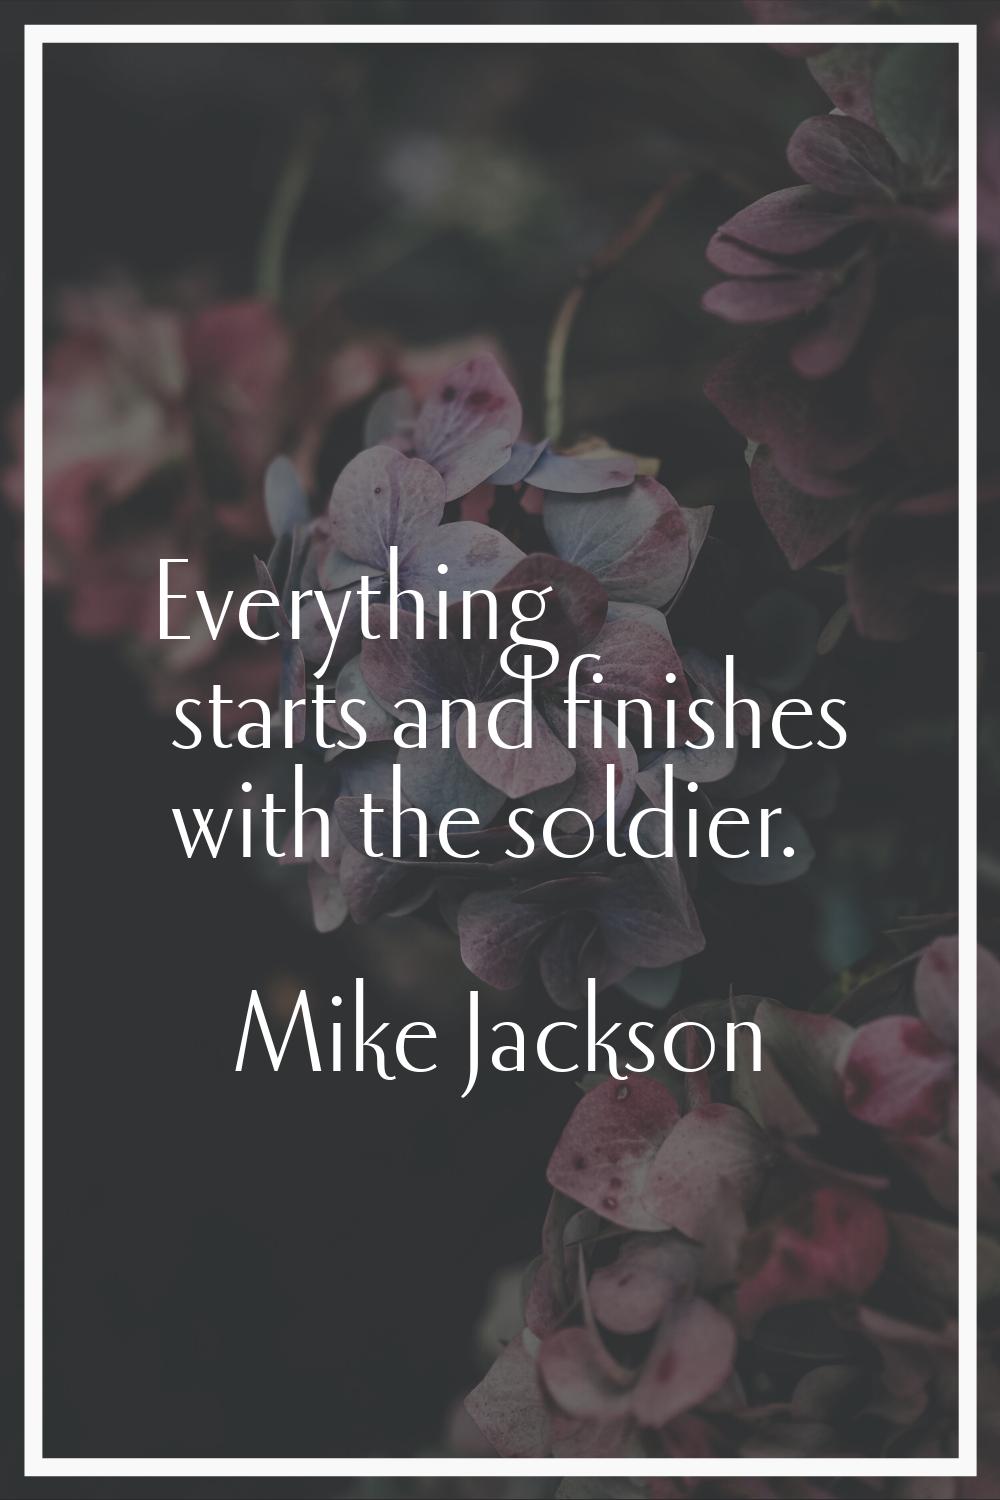 Everything starts and finishes with the soldier.